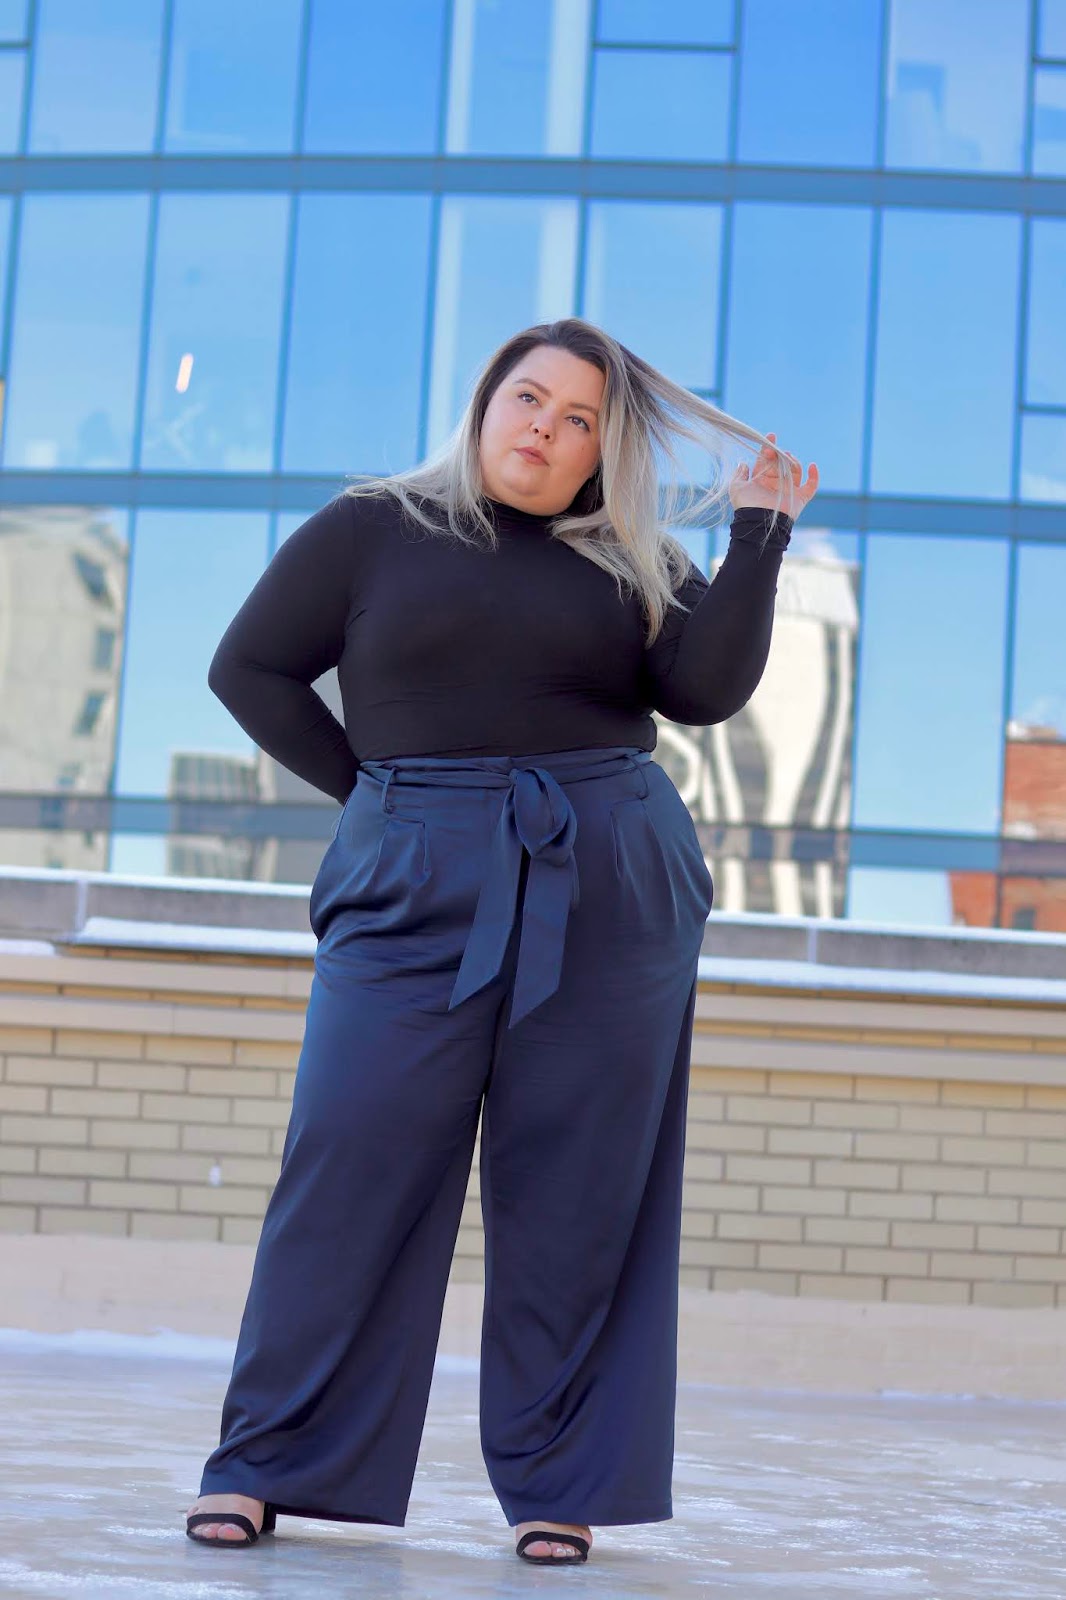 Chicago Plus Size Petite Fashion Blogger, influencer, YouTuber, and model Natalie Craig, of Natalie in the City, reviews Universal Standard's plus size petite wide leg satin pants and turtle necks.